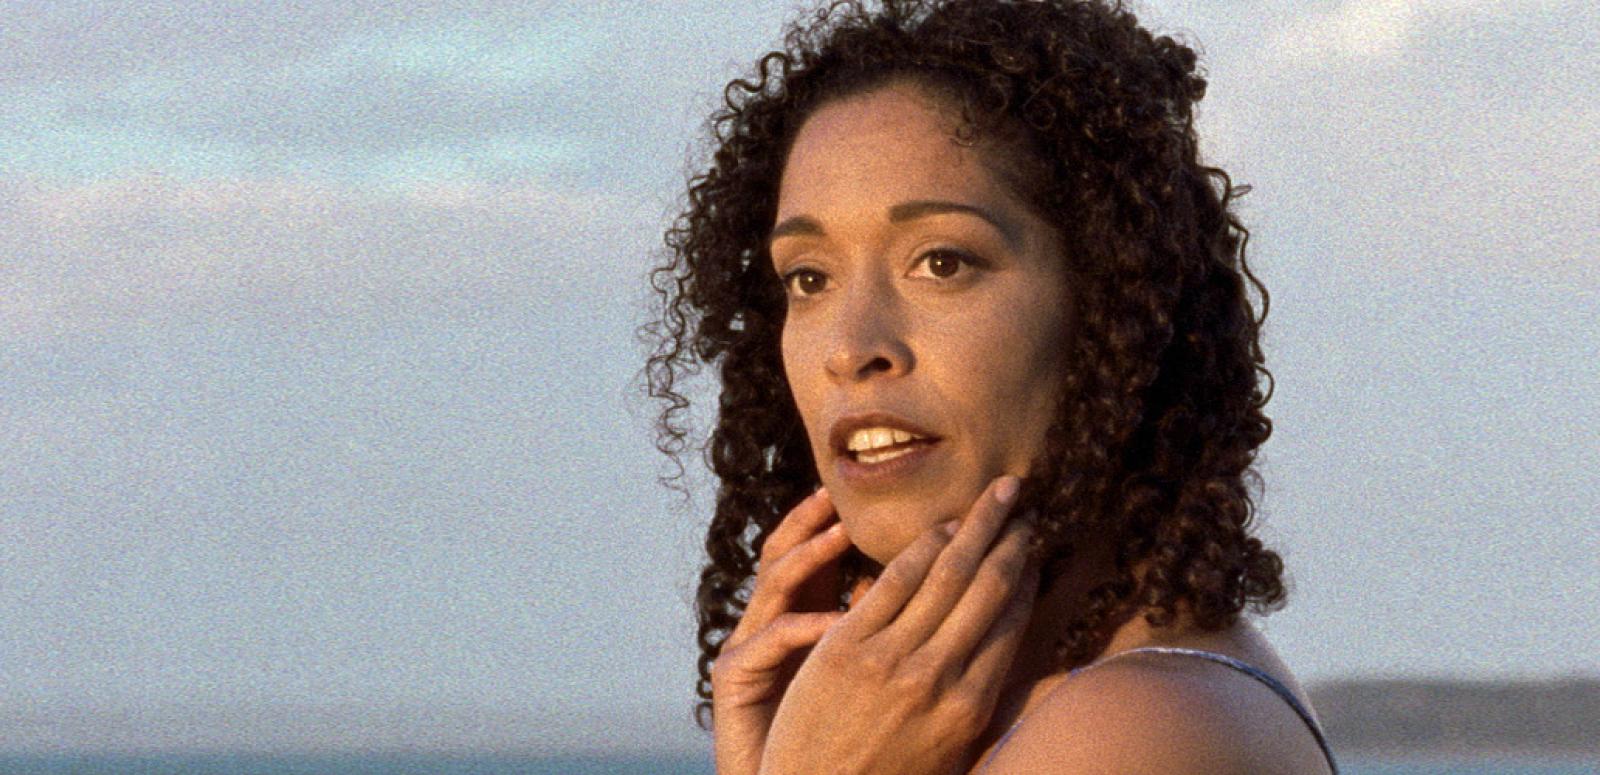 Close up of actor Rachel Maza looking to her left with her hands to her face in a scene from Radiance. The ocean and a cloudy sky can be seen in the background.